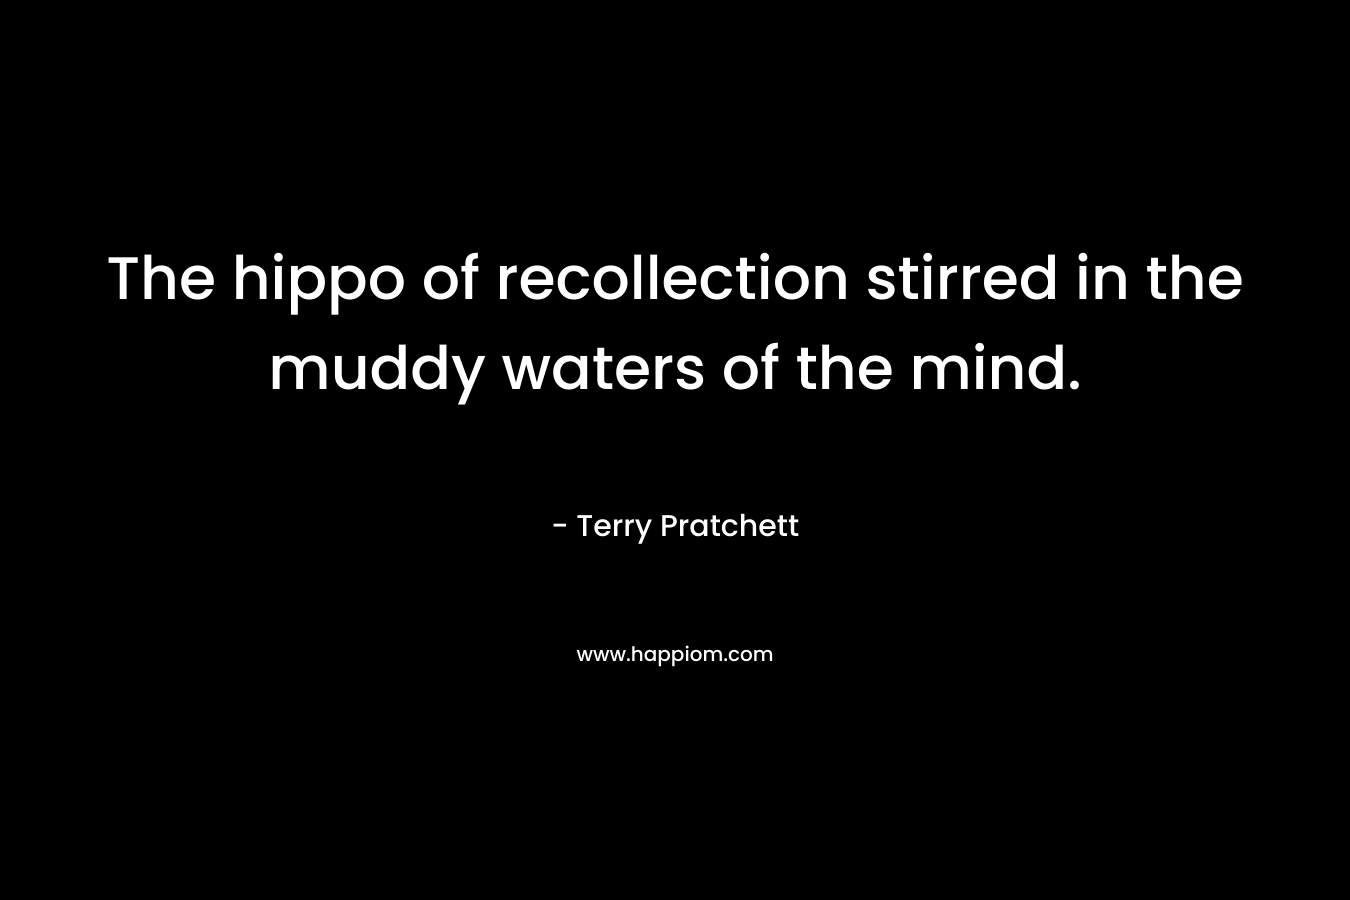 The hippo of recollection stirred in the muddy waters of the mind. – Terry Pratchett